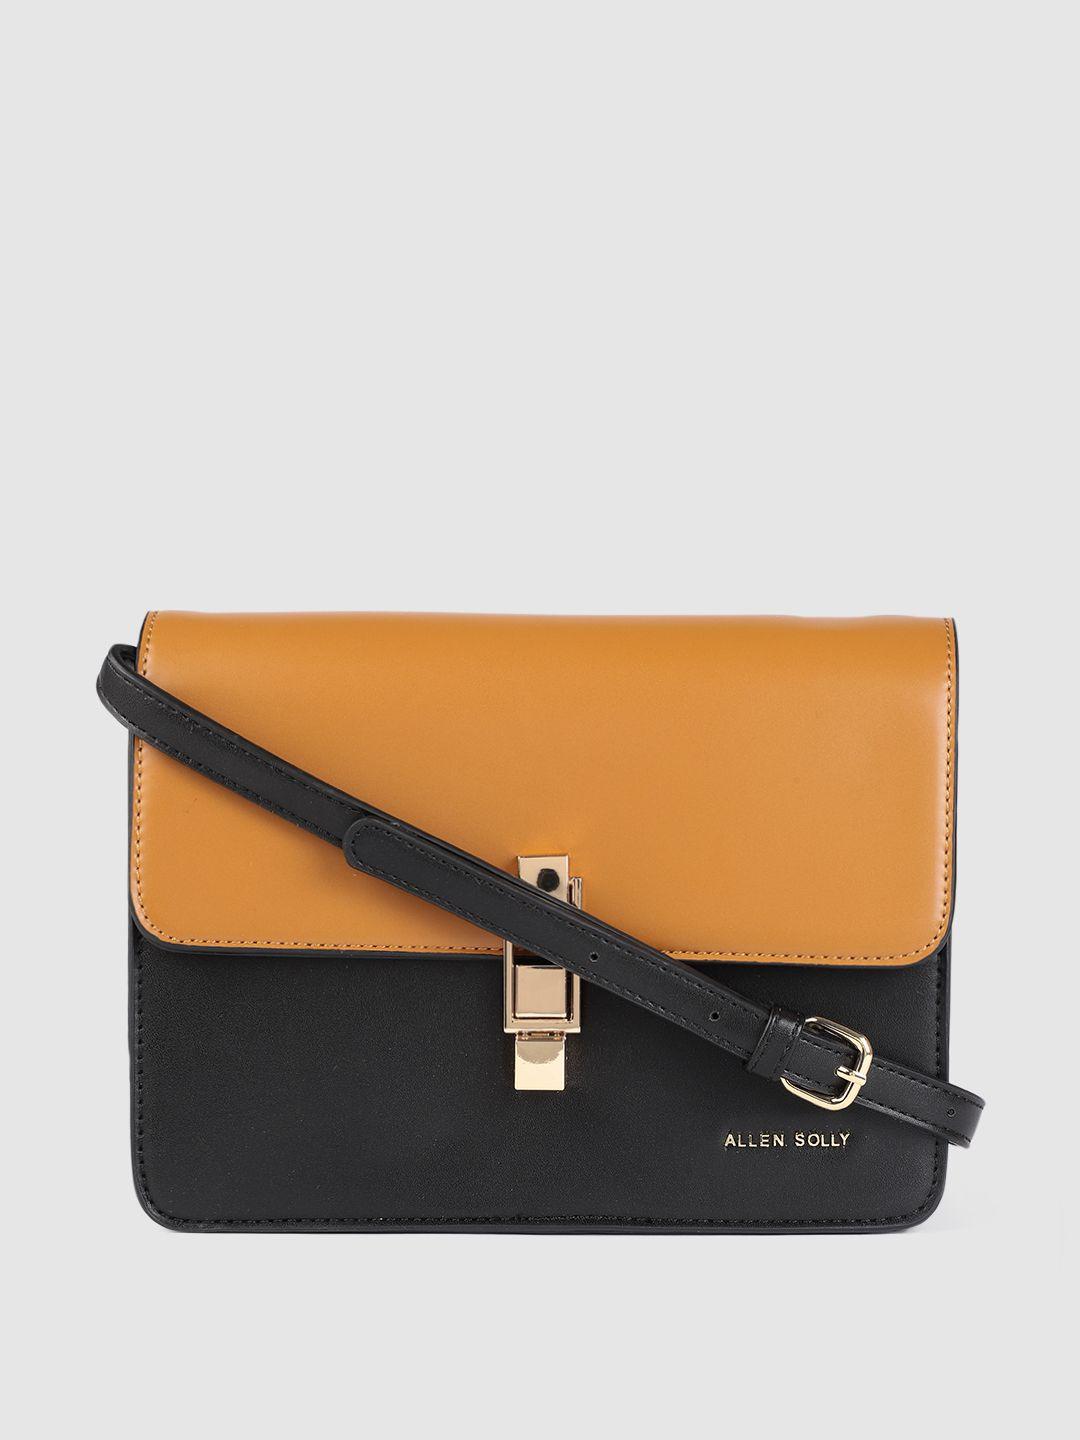 allen solly tan brown & black colourblocked pu structured sling bag